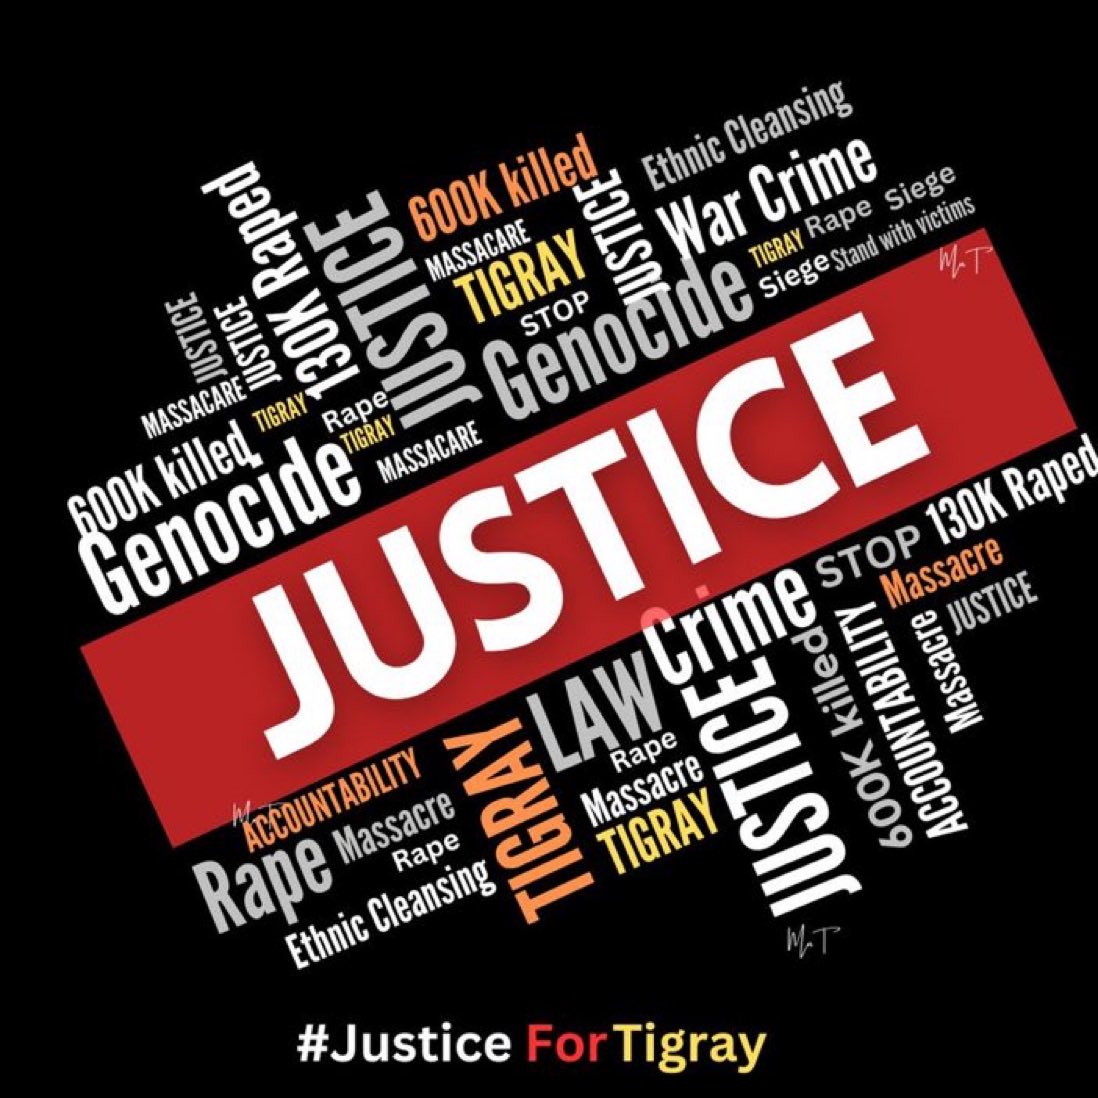 For the past #845dyasTigrayGenocide still counting,Violations of social&cultural rights.Extrajudicial killings 
Widespread sexualviolence
Forceddisplacement
Massacre 
Arbitrary detentions
Torture @WhiteHouse @StateDept @EUCouncil @UN @UNHumanRights #Justice4Tigray @UN_HRC @hrw